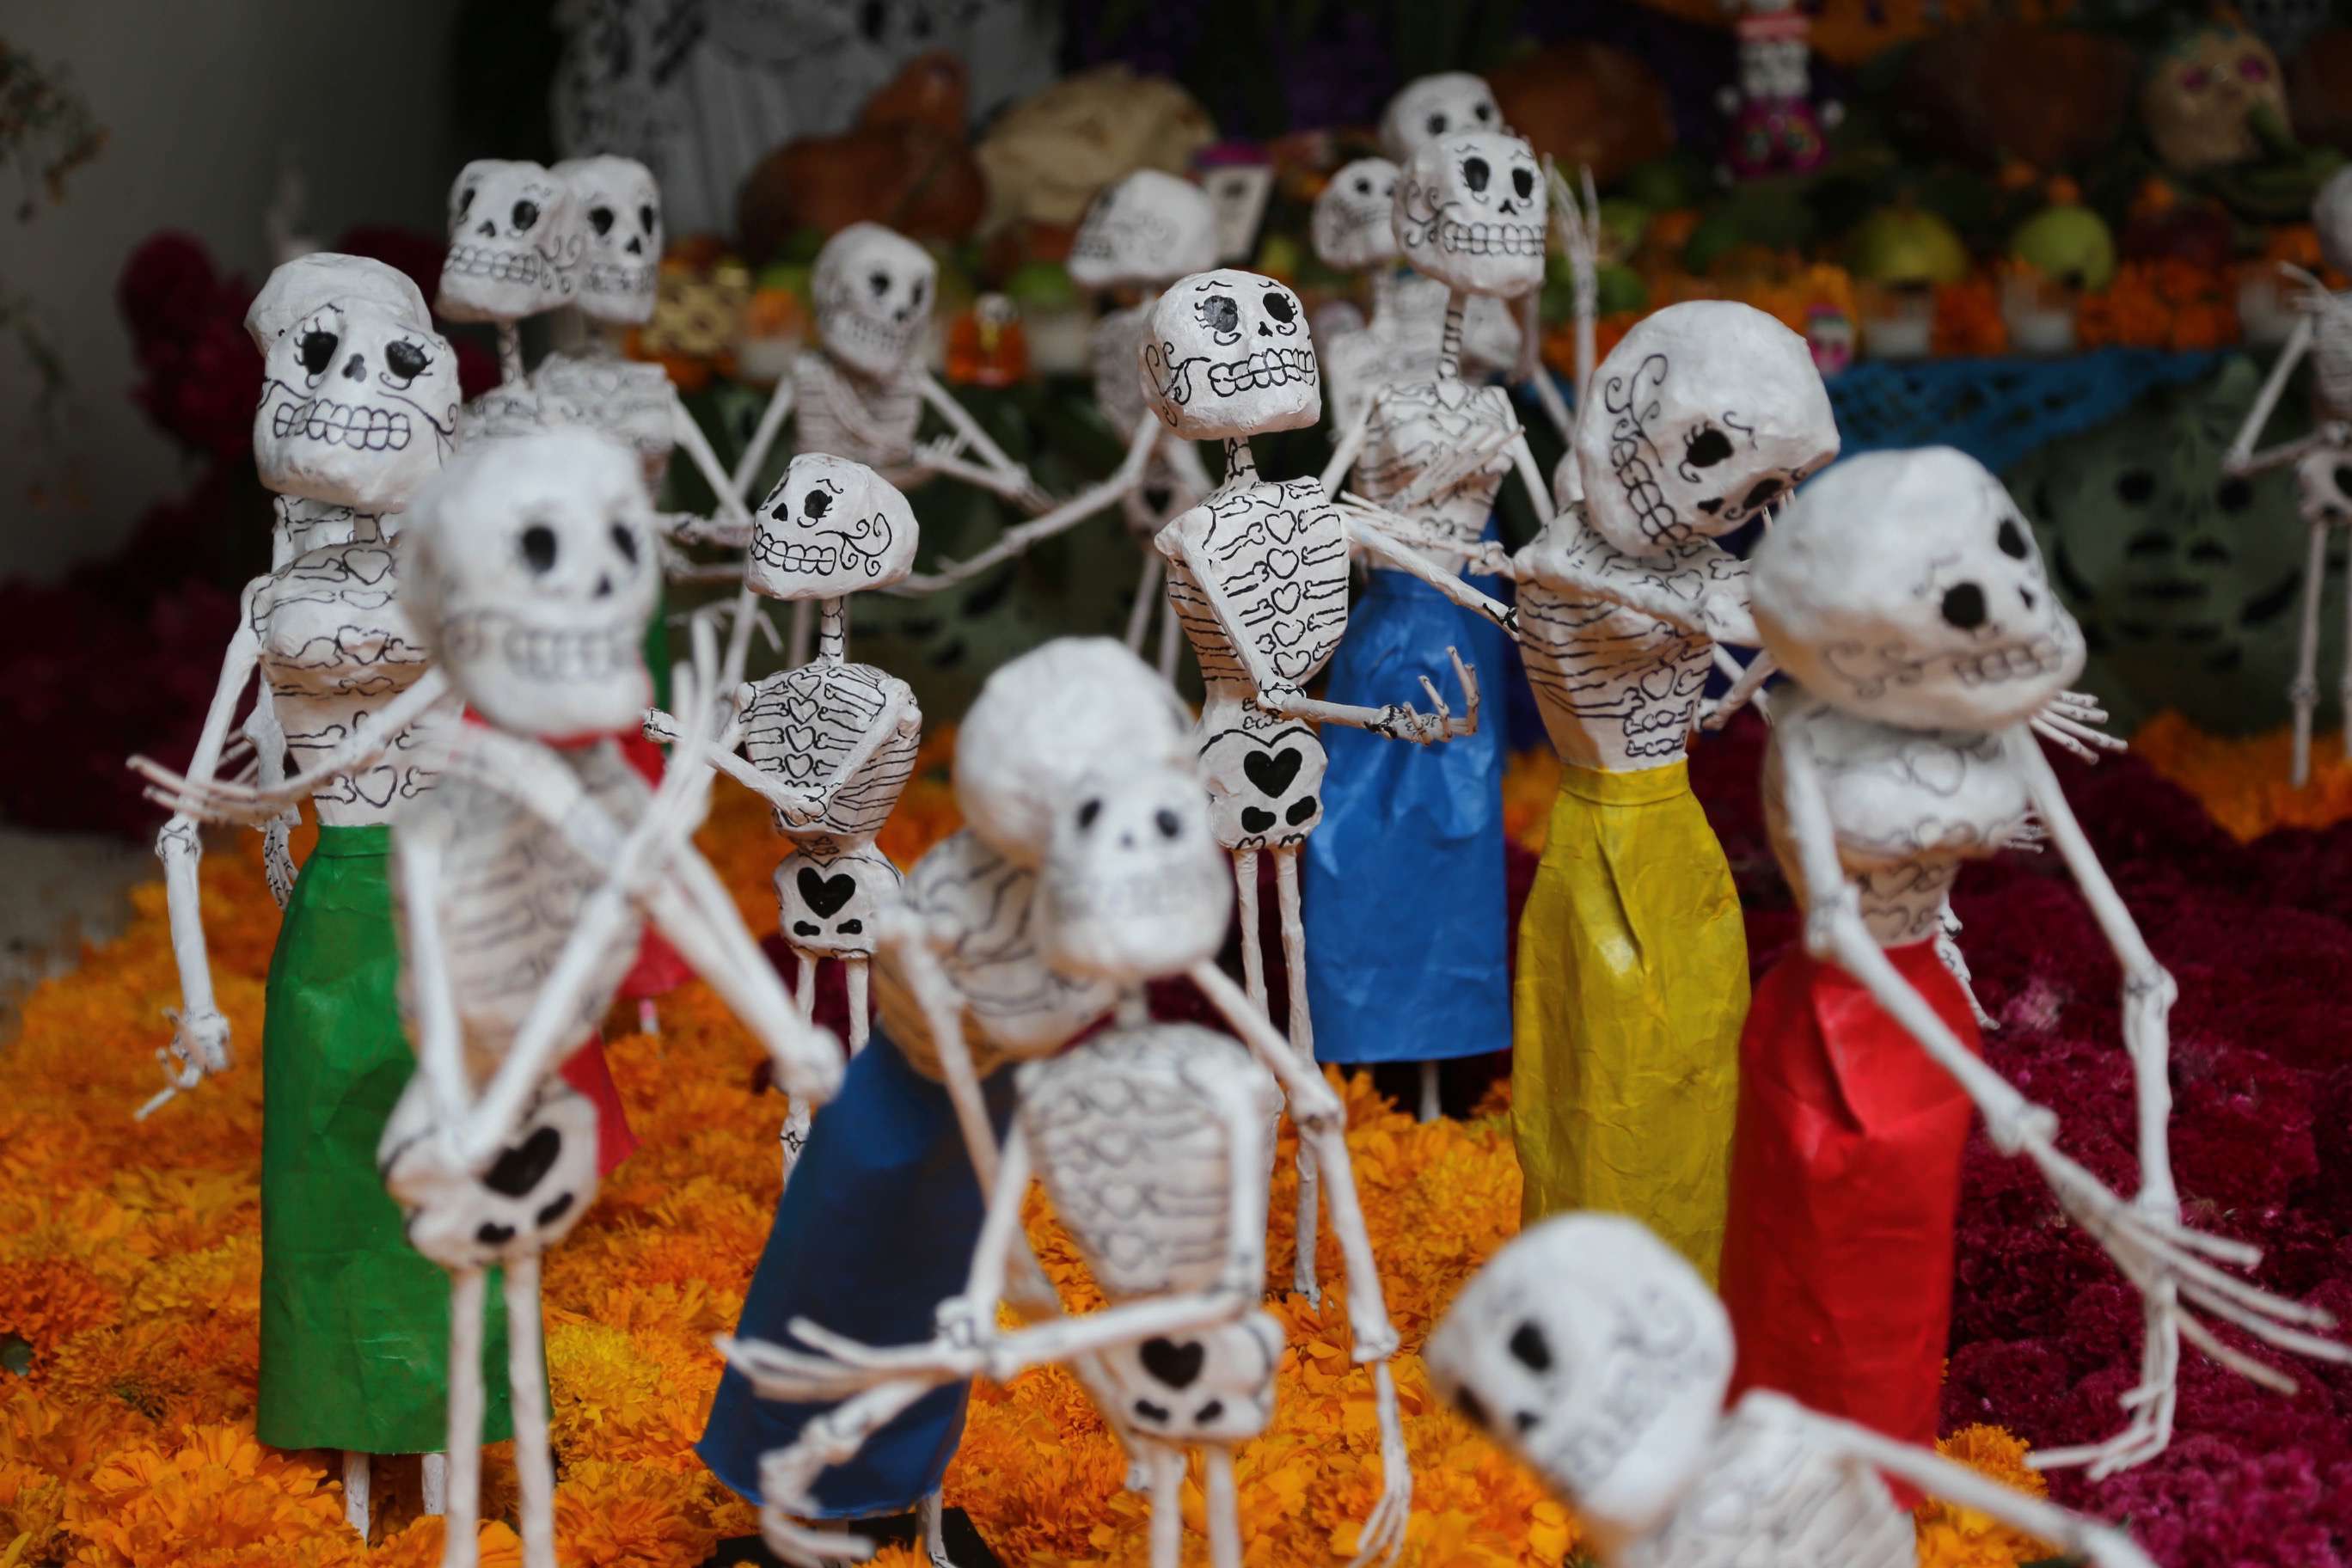 Skeletons are a major visual element in many of the altars and elements during Dia de los Muertos.